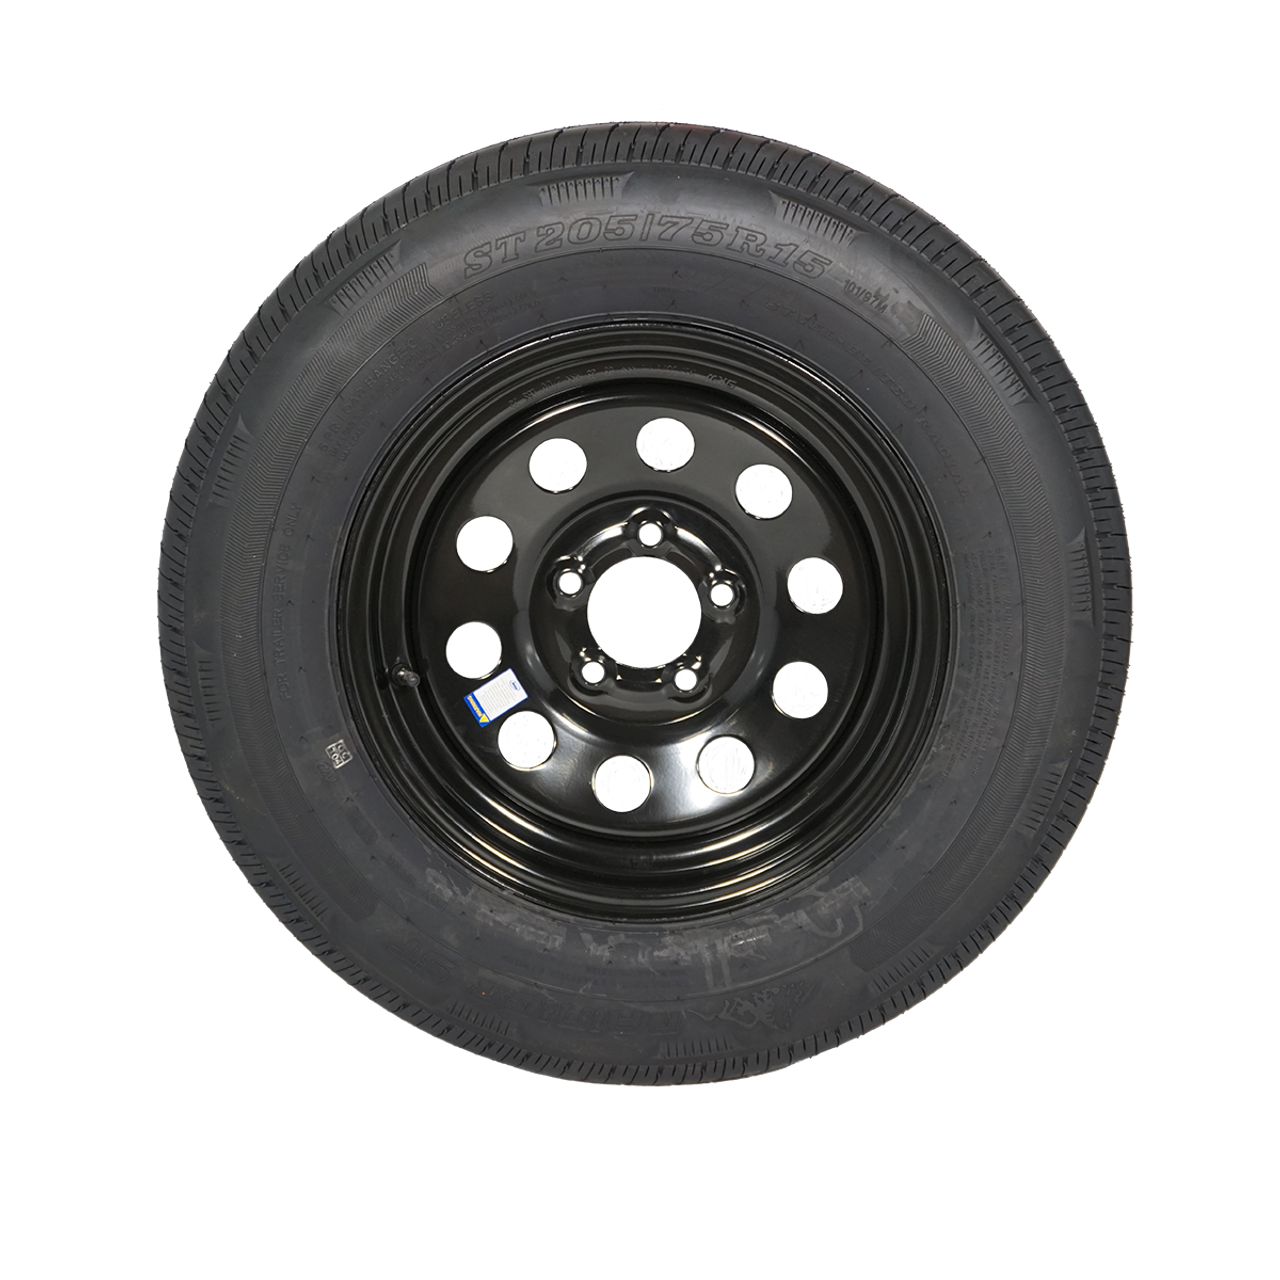 WT15-5BMR --- 15" Trailer Wheel and Tire Assembly, 5 on 4.5" - Black